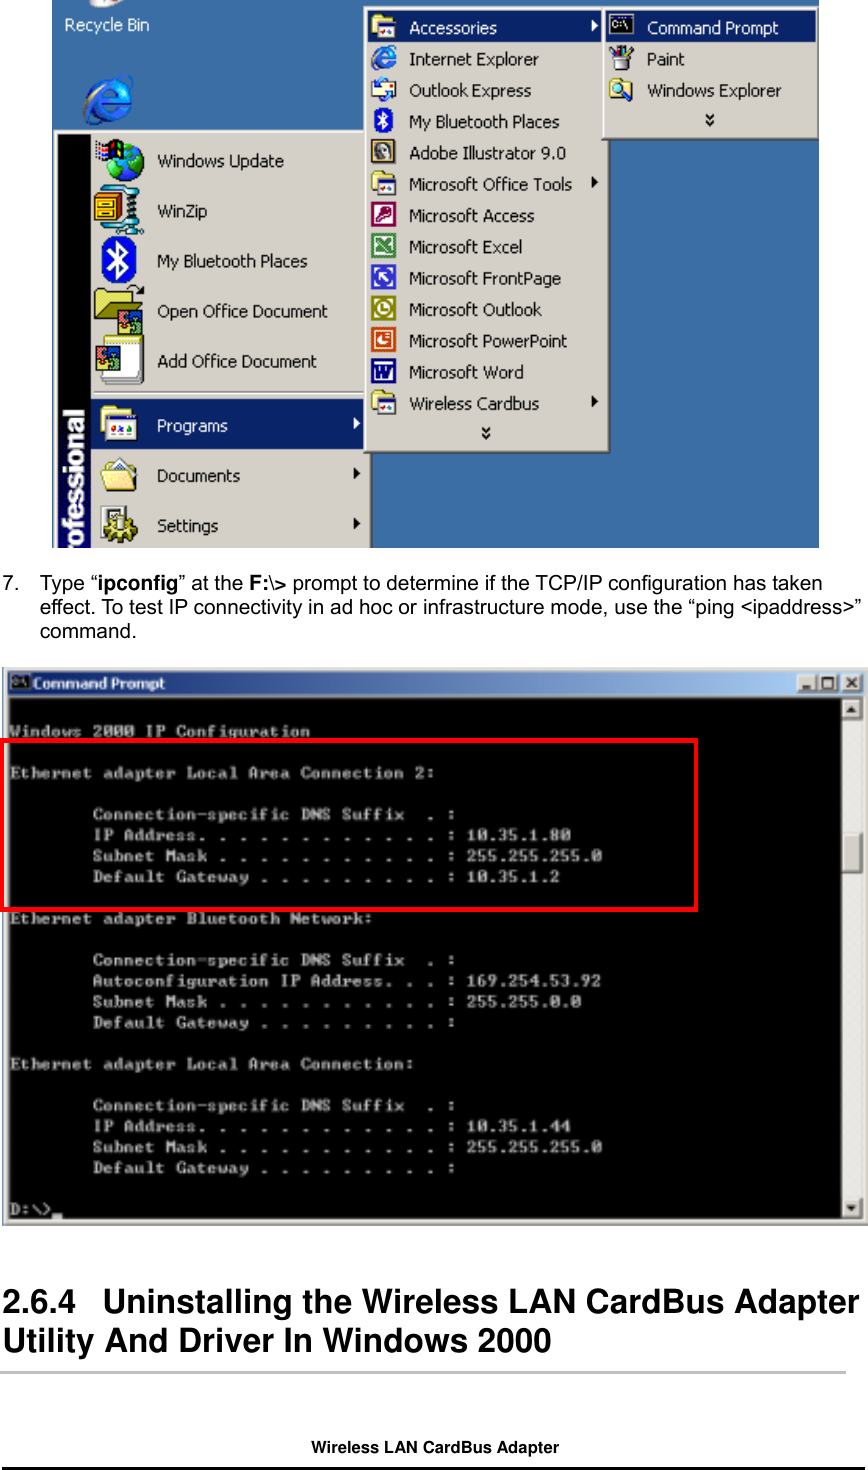   7. Type “ipconfig” at the F:\&gt; prompt to determine if the TCP/IP configuration has taken effect. To test IP connectivity in ad hoc or infrastructure mode, use the “ping &lt;ipaddress&gt;” command.     2.6.4  Uninstalling the Wireless LAN CardBus Adapter Utility And Driver In Windows 2000   Wireless LAN CardBus Adapter 